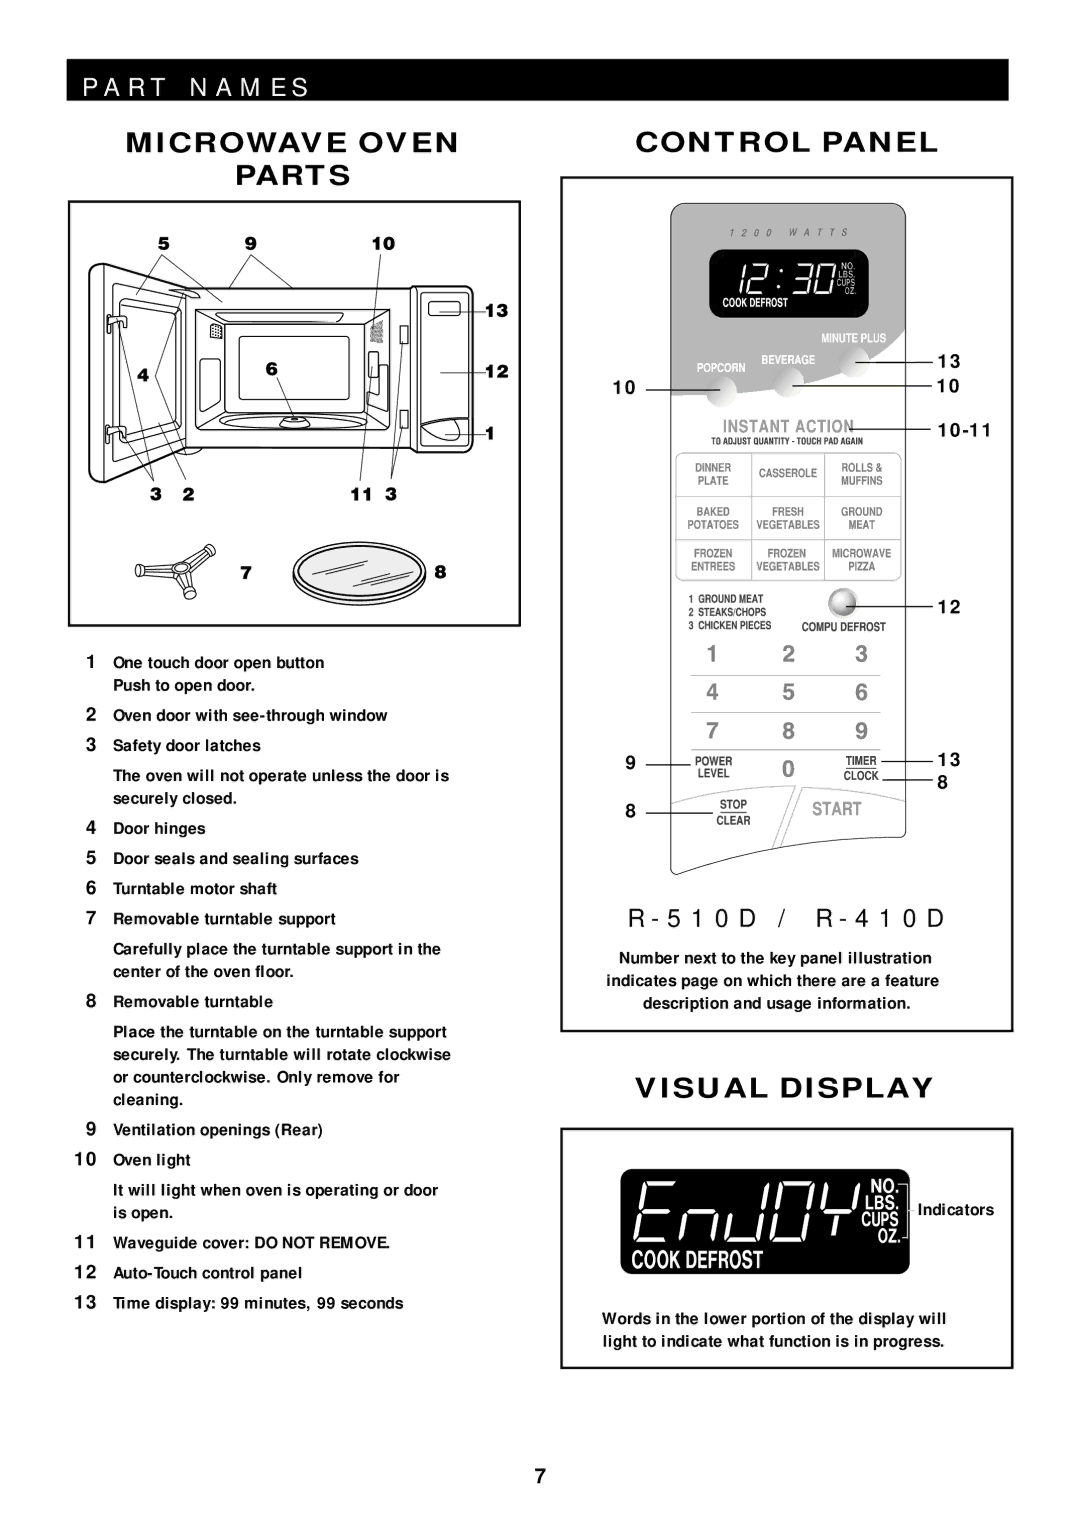 Sharp R-510D, R-410D operation manual Microwave Oven, Parts, Control Panel, Visual Display, 10-11 